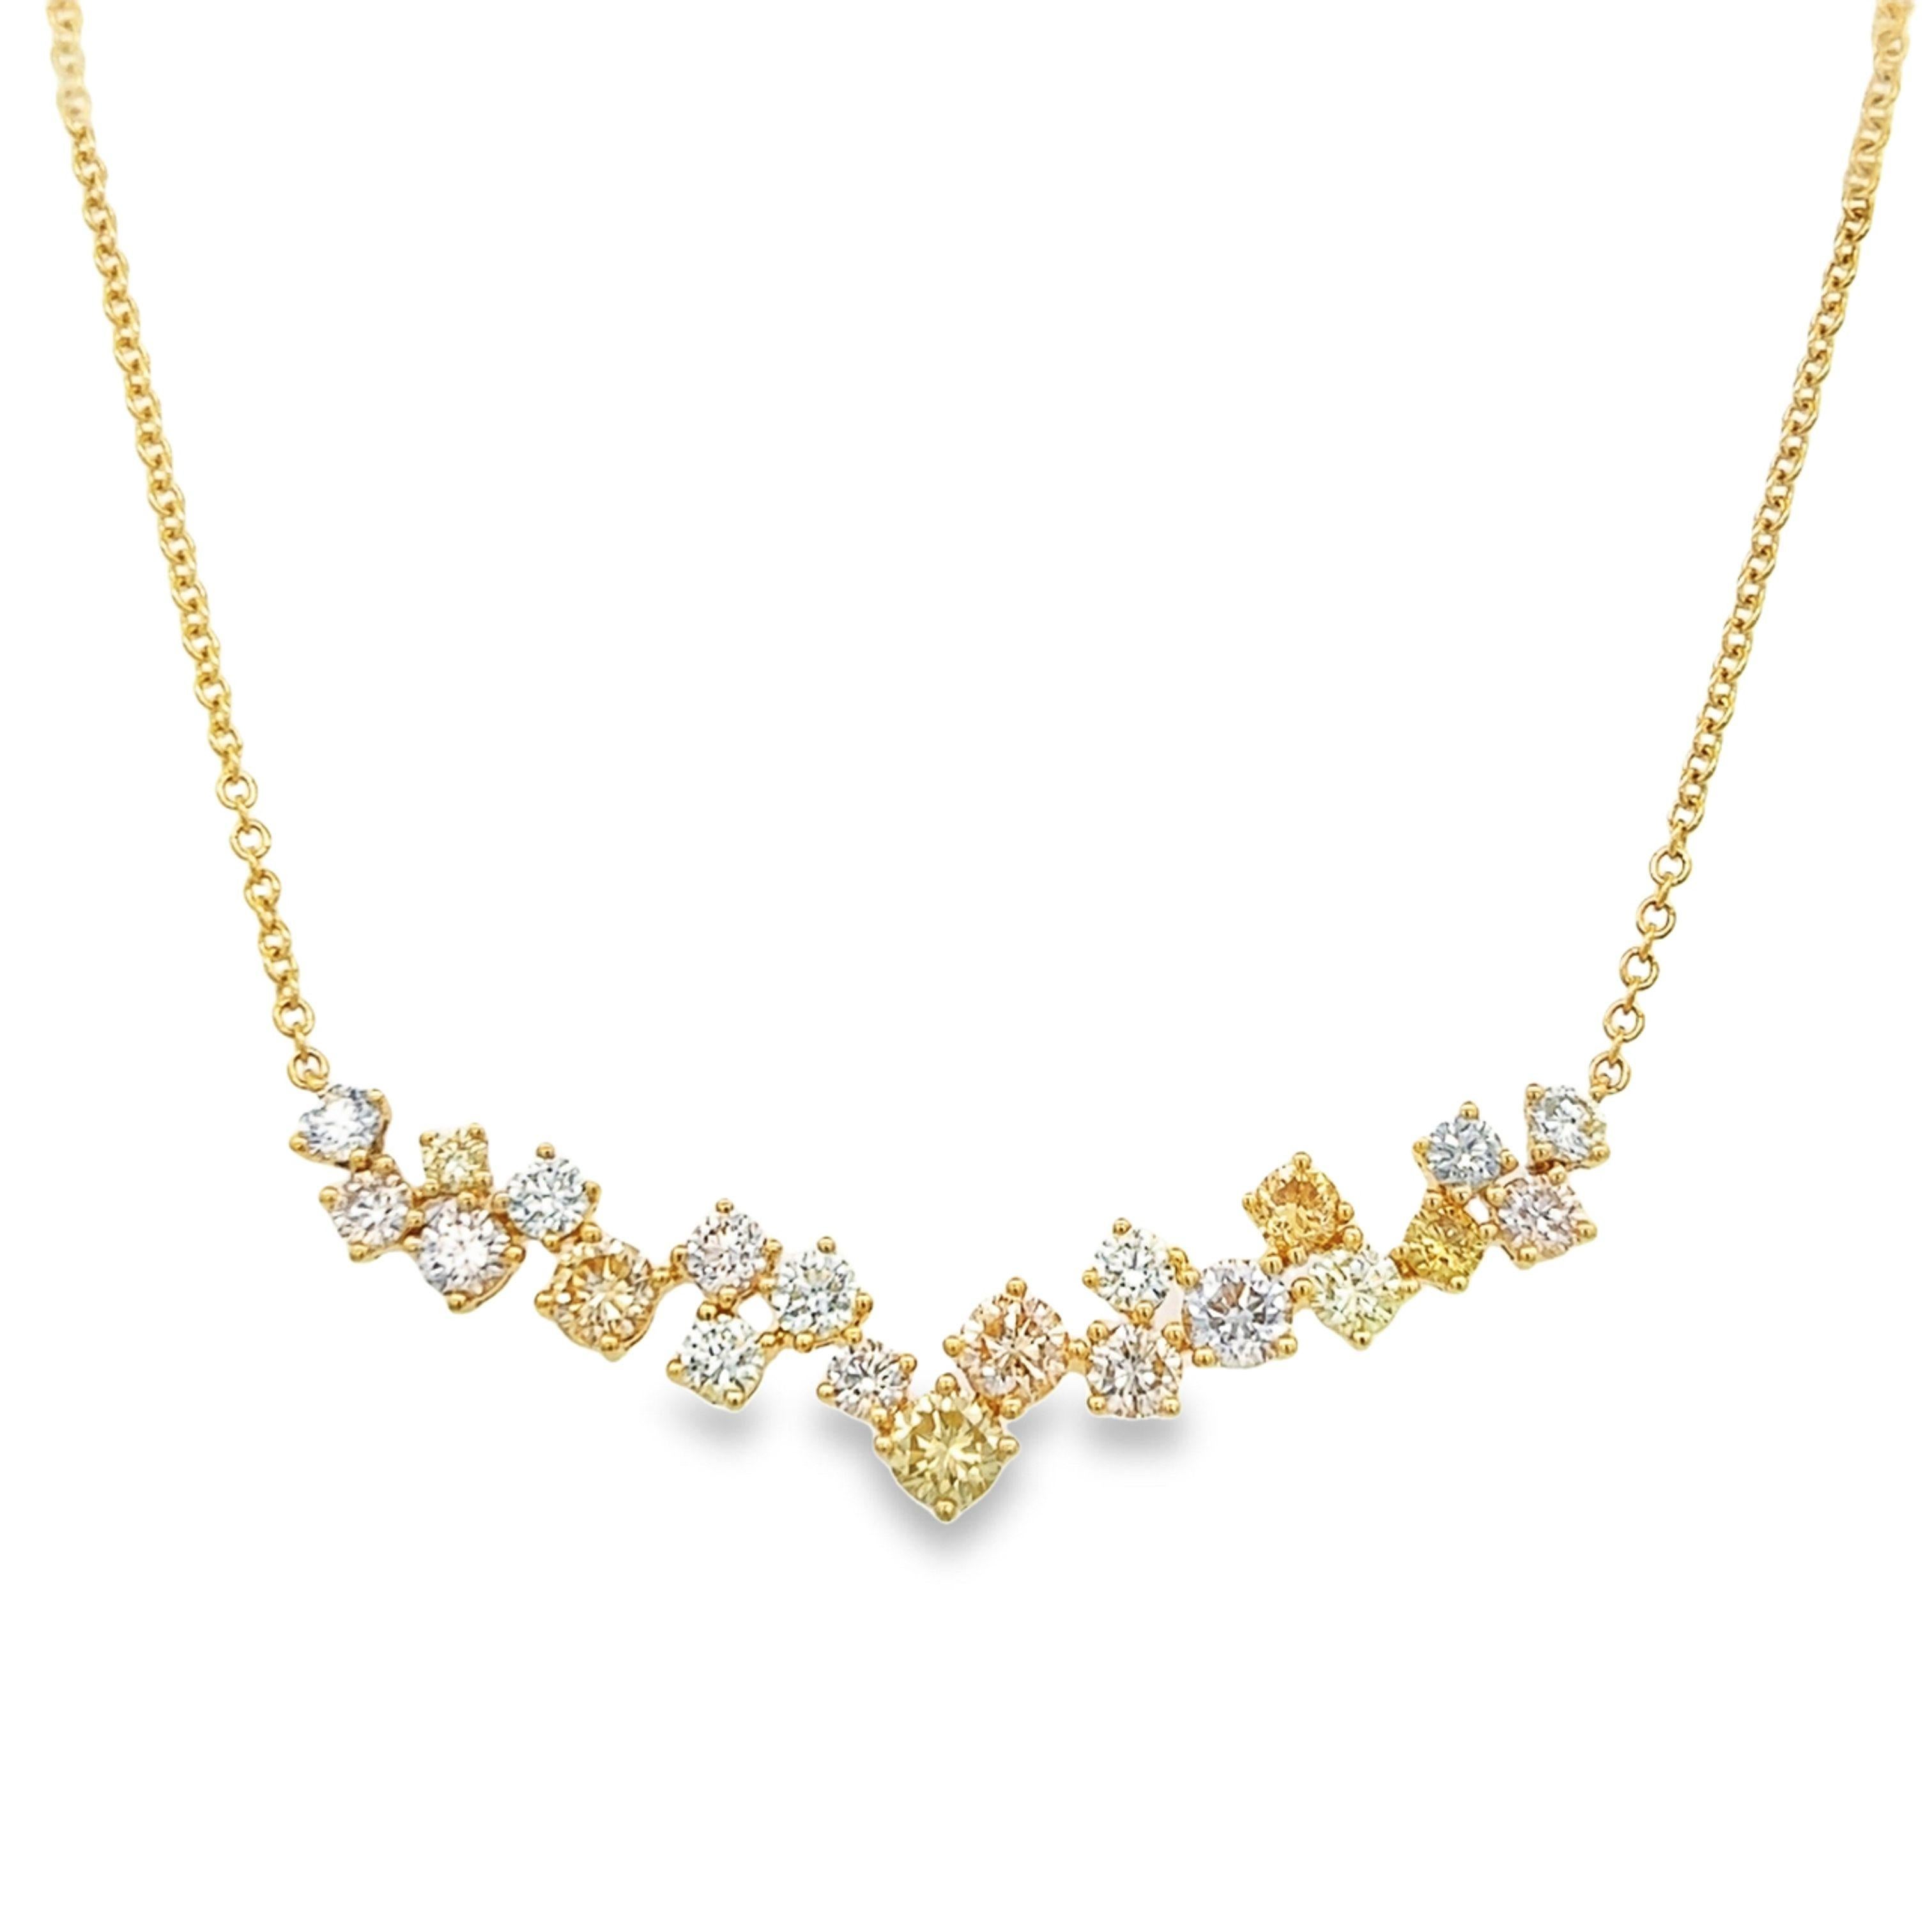 Heart Cut Alexander Beverly Hills 4.56cat White & Yellow Diamond Pendant Necklace 18k For Sale